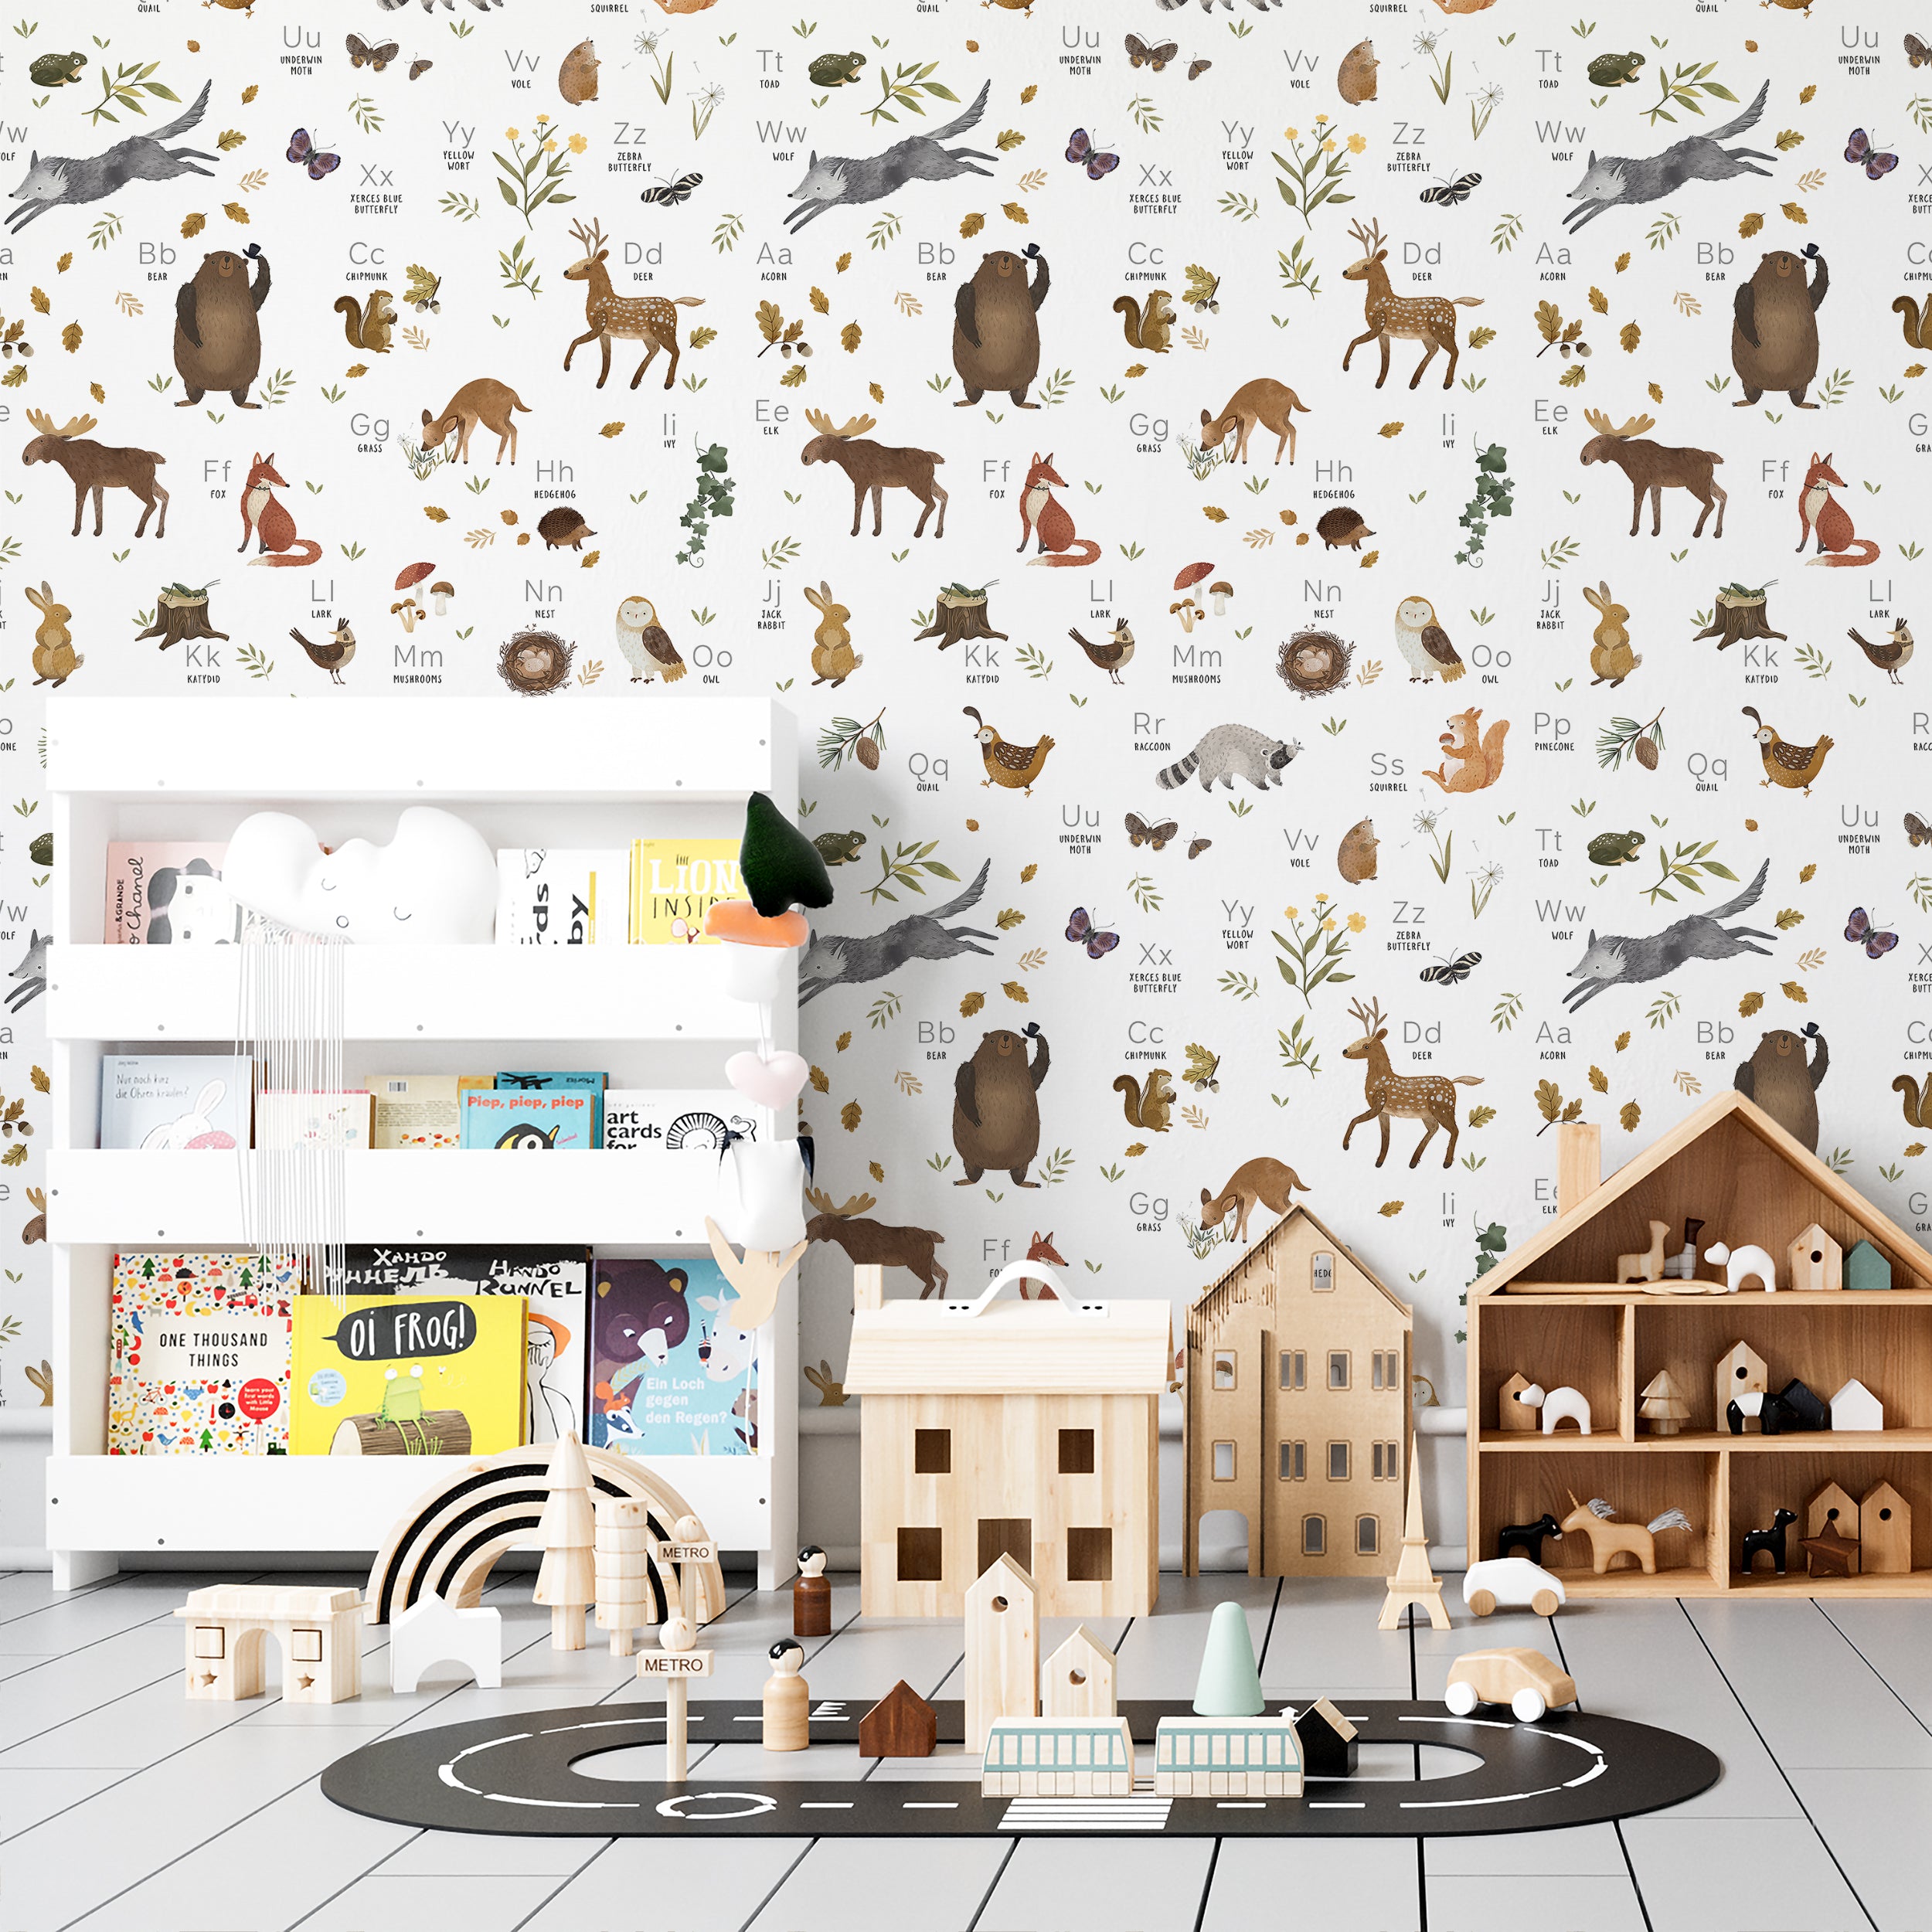 A child’s playroom decorated with Forest Alphabet Animal Wallpaper II. The wallpaper enriches the room with its educational and playful design, displaying various animals and alphabet letters. This backdrop complements a white toy storage unit and a playful, child-friendly interior setup